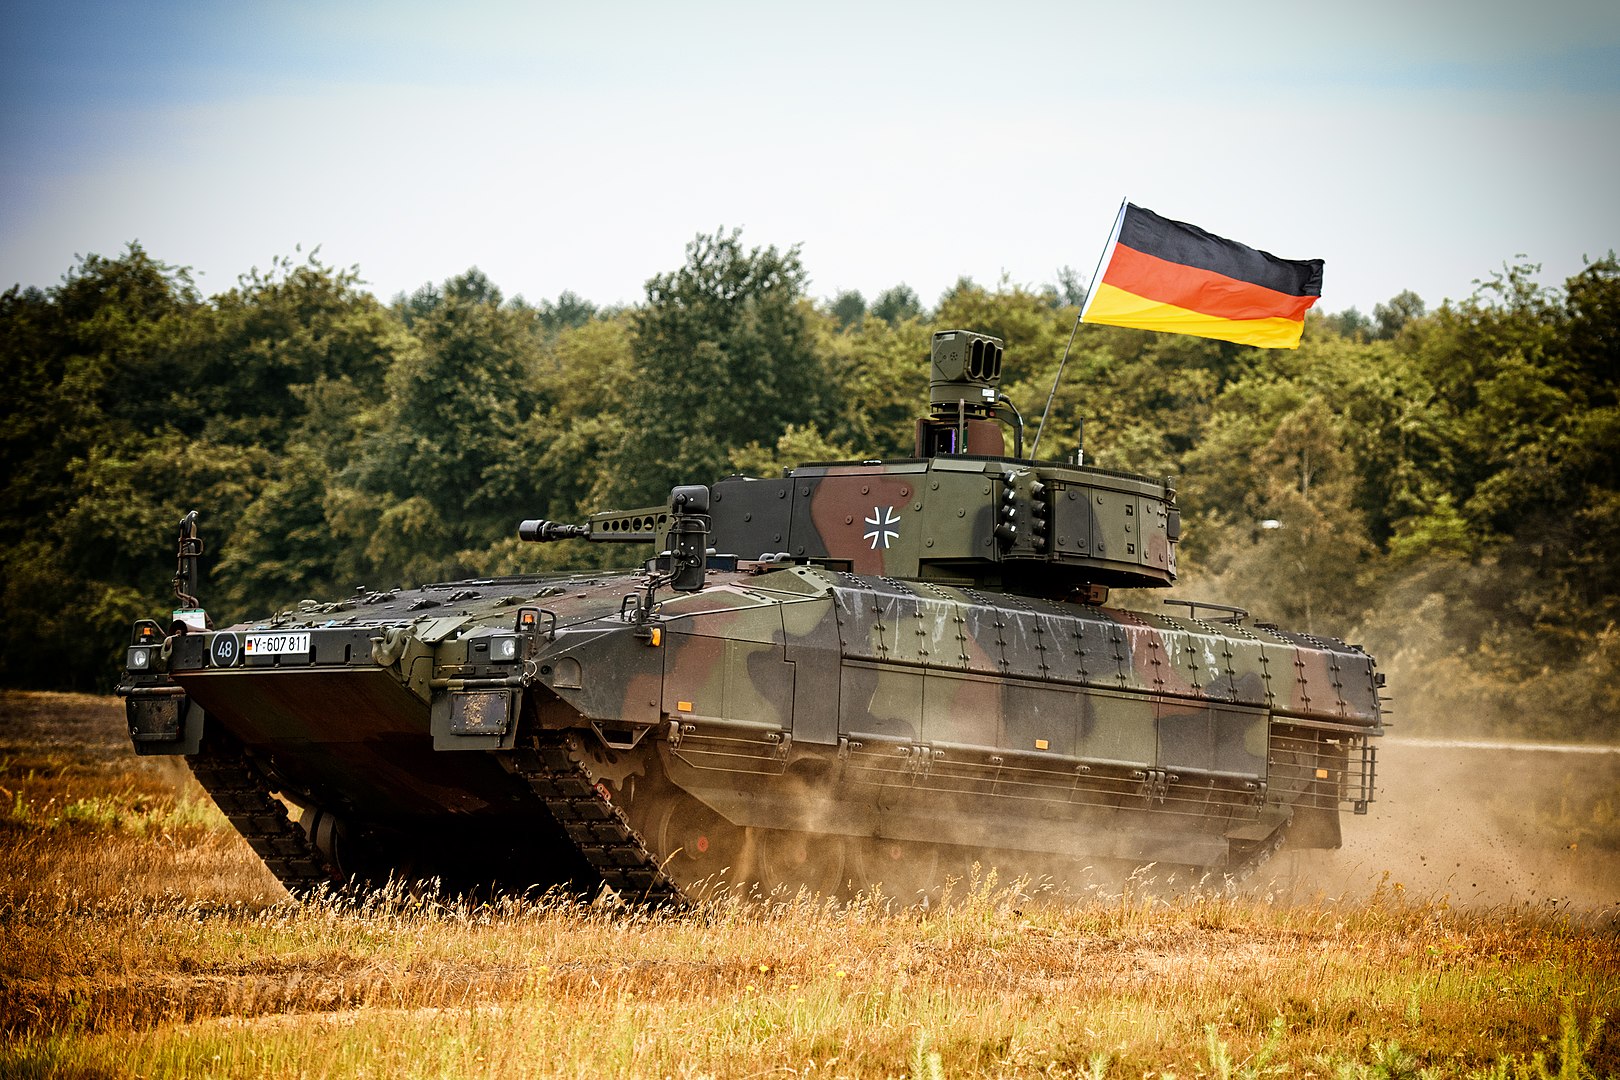 Germany has 18 Puma BMPs worth $17 million out of service - the world's most expensive infantry fighting vehicle